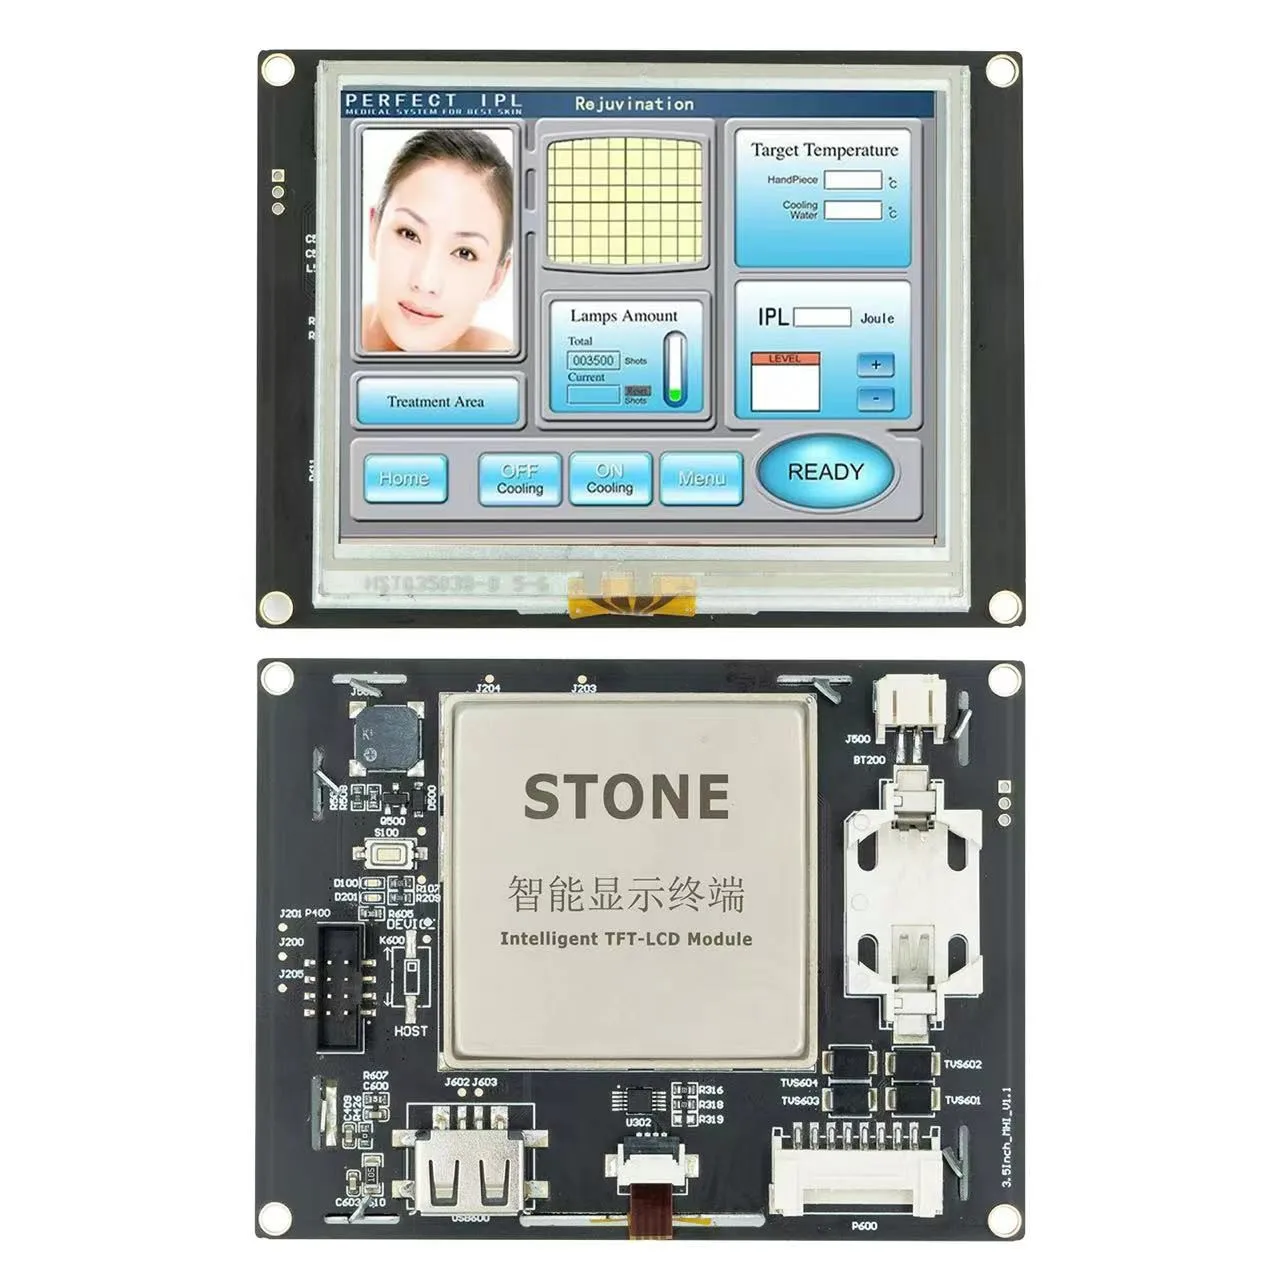 Stone 3.5 HMI Smart TFT projects, 1G Hz Cortex A8 CPU, and 262k true-to-life colors 300 nit brightness, LED back light